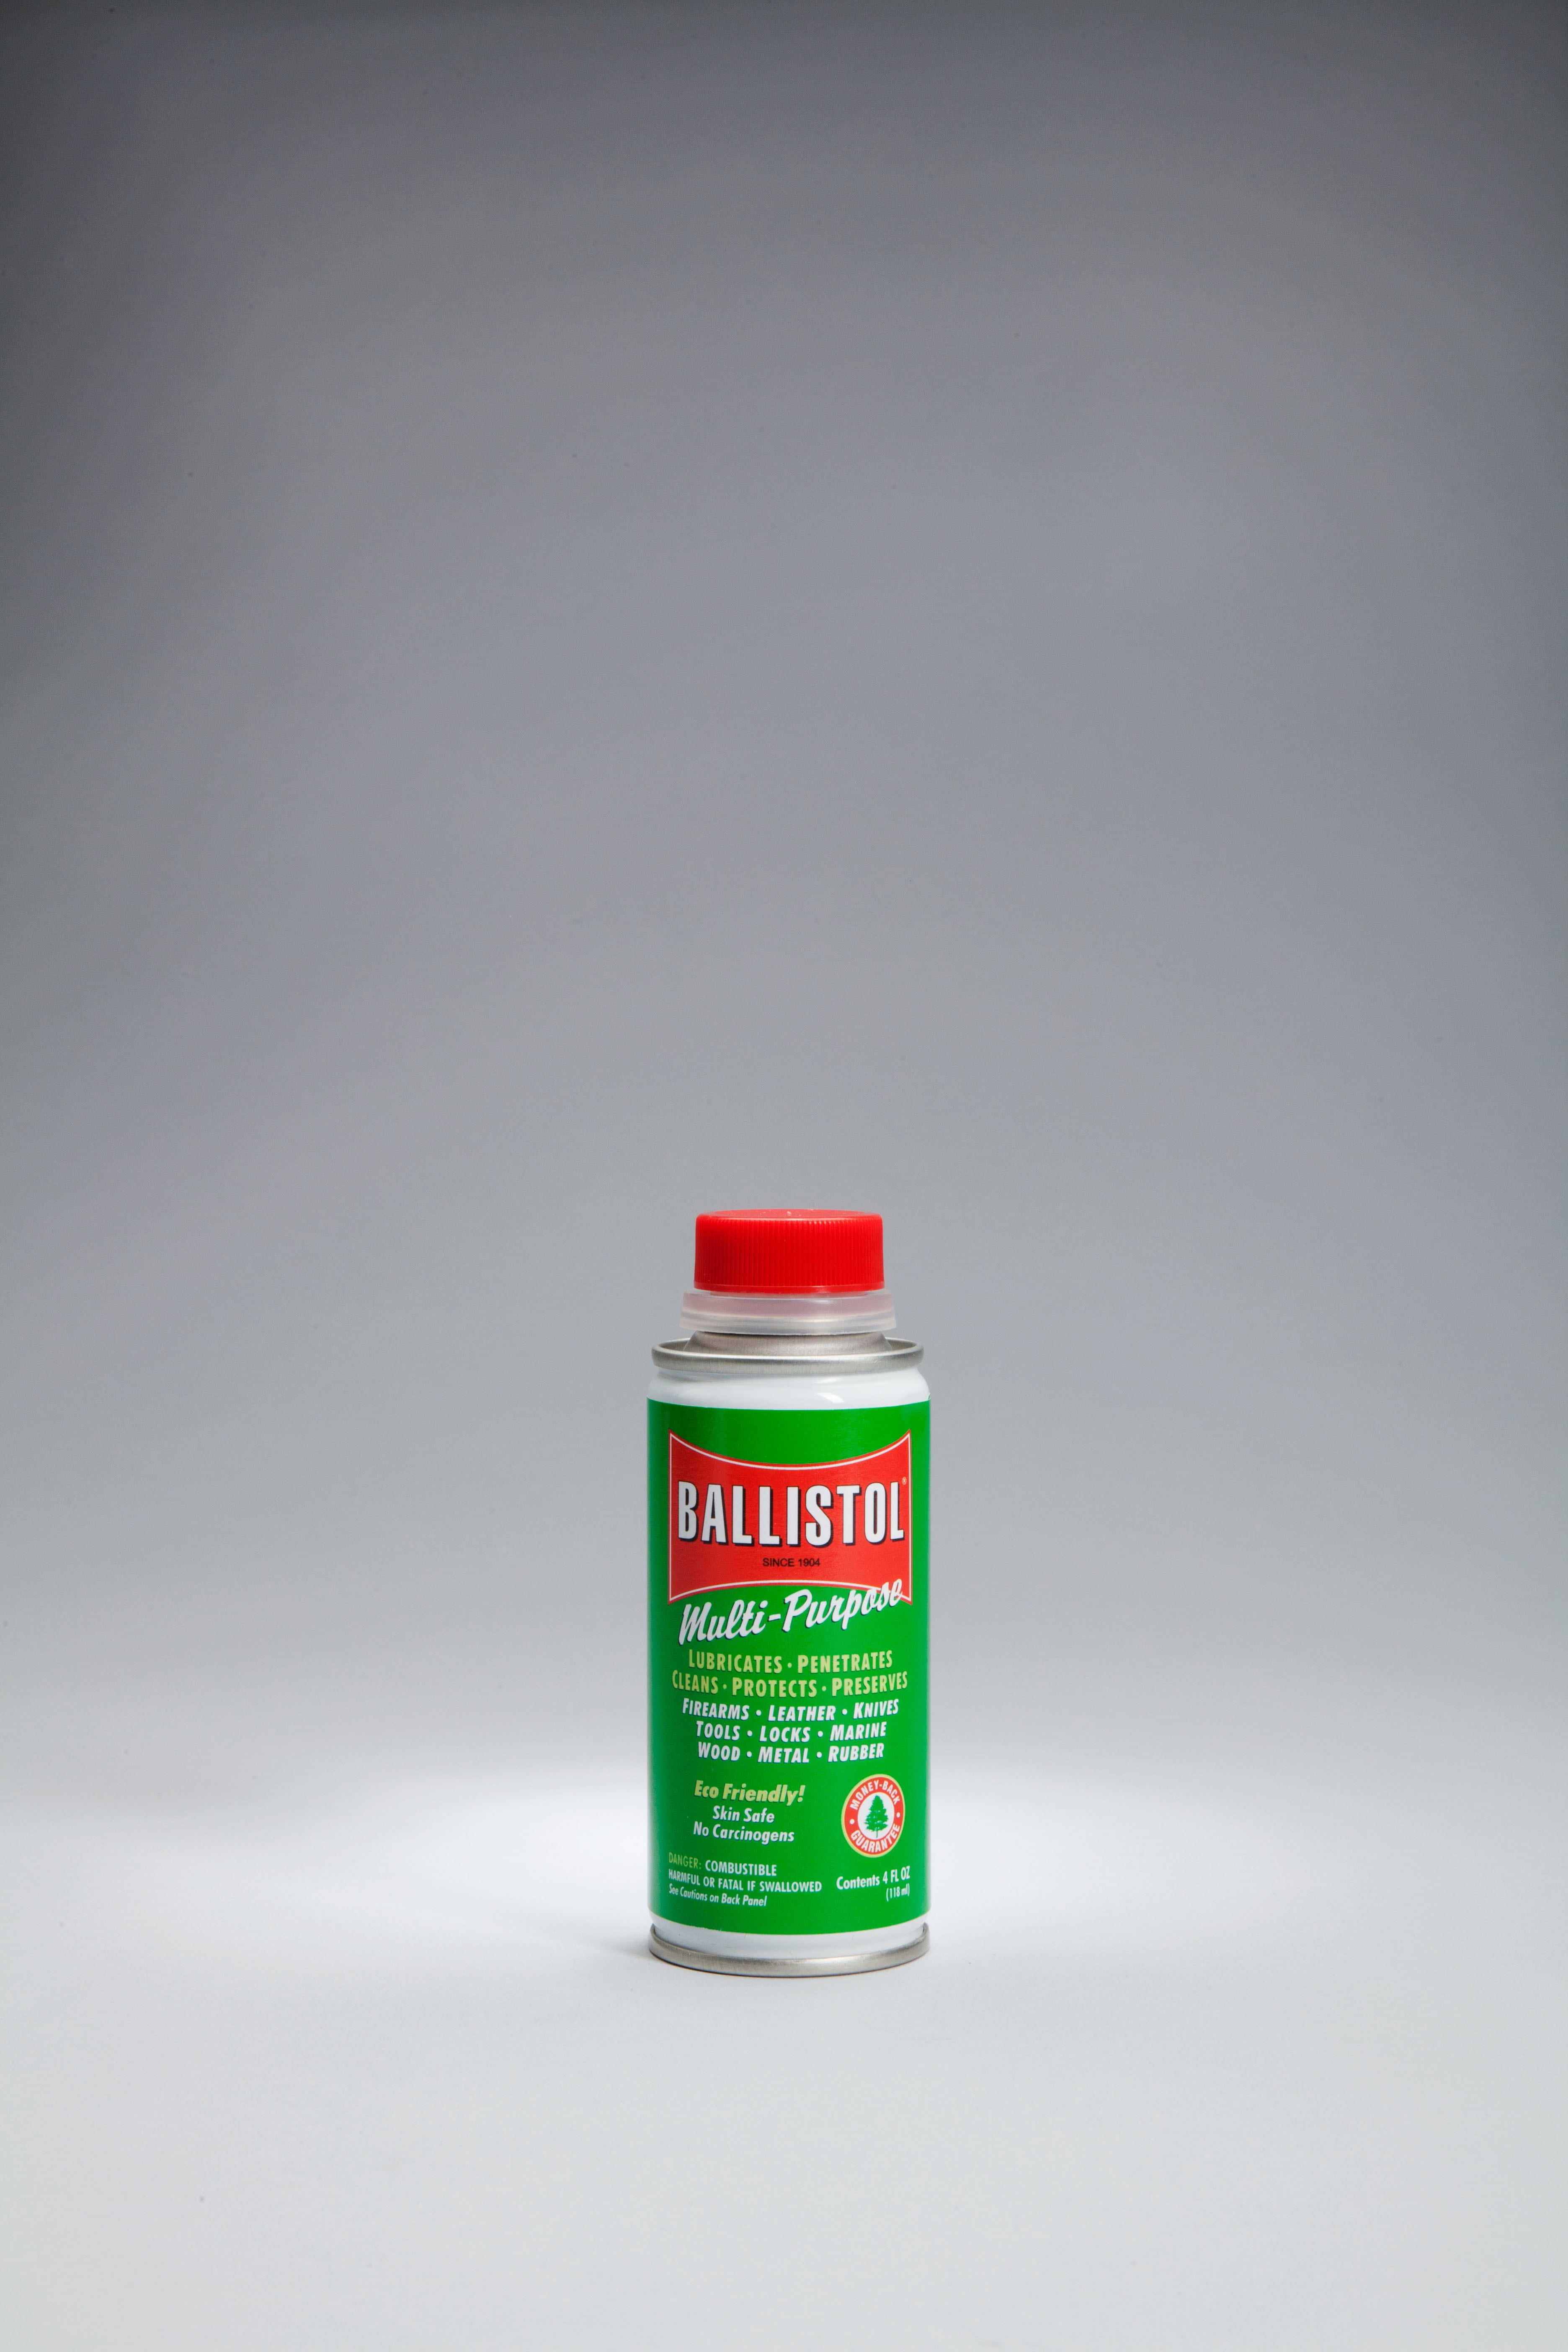  Ballistol Multi-Purpose Lubricant Cleaner Protectant, 4-Ounce,  BO120045, Green : Gun Lubrication : Sports & Outdoors